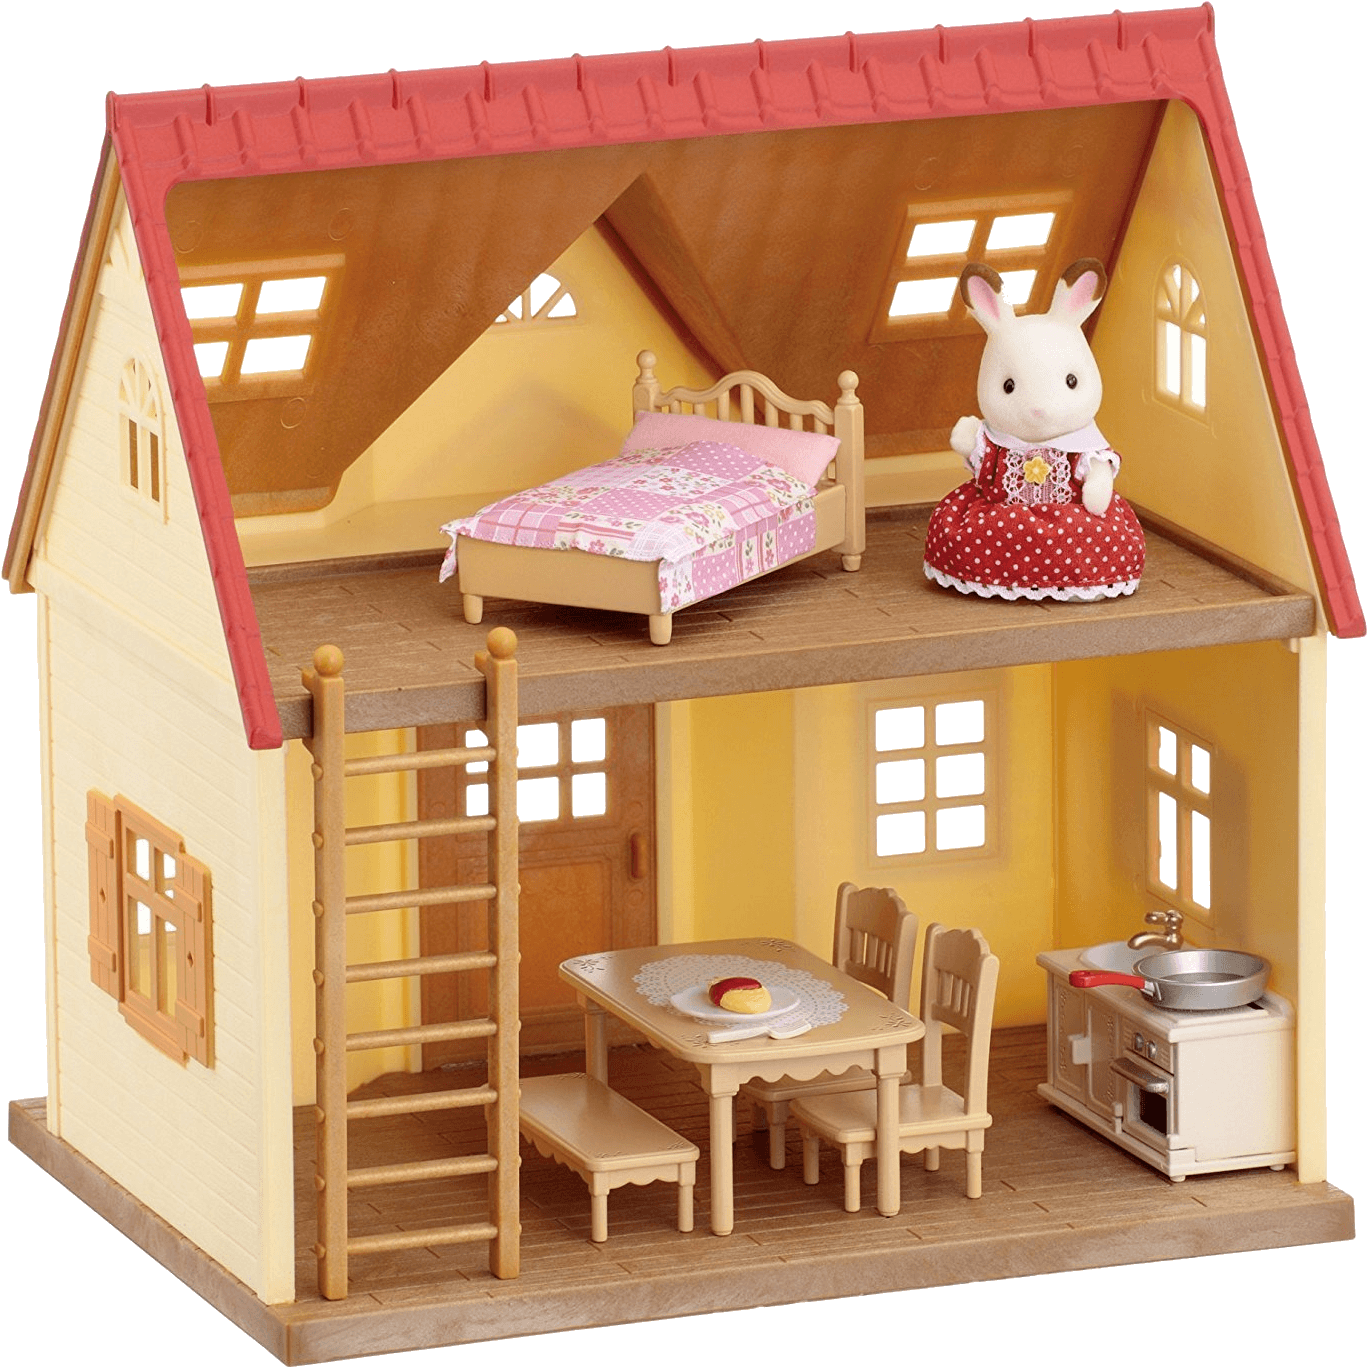 Toy Dollhousewith Furnitureand Figure PNG